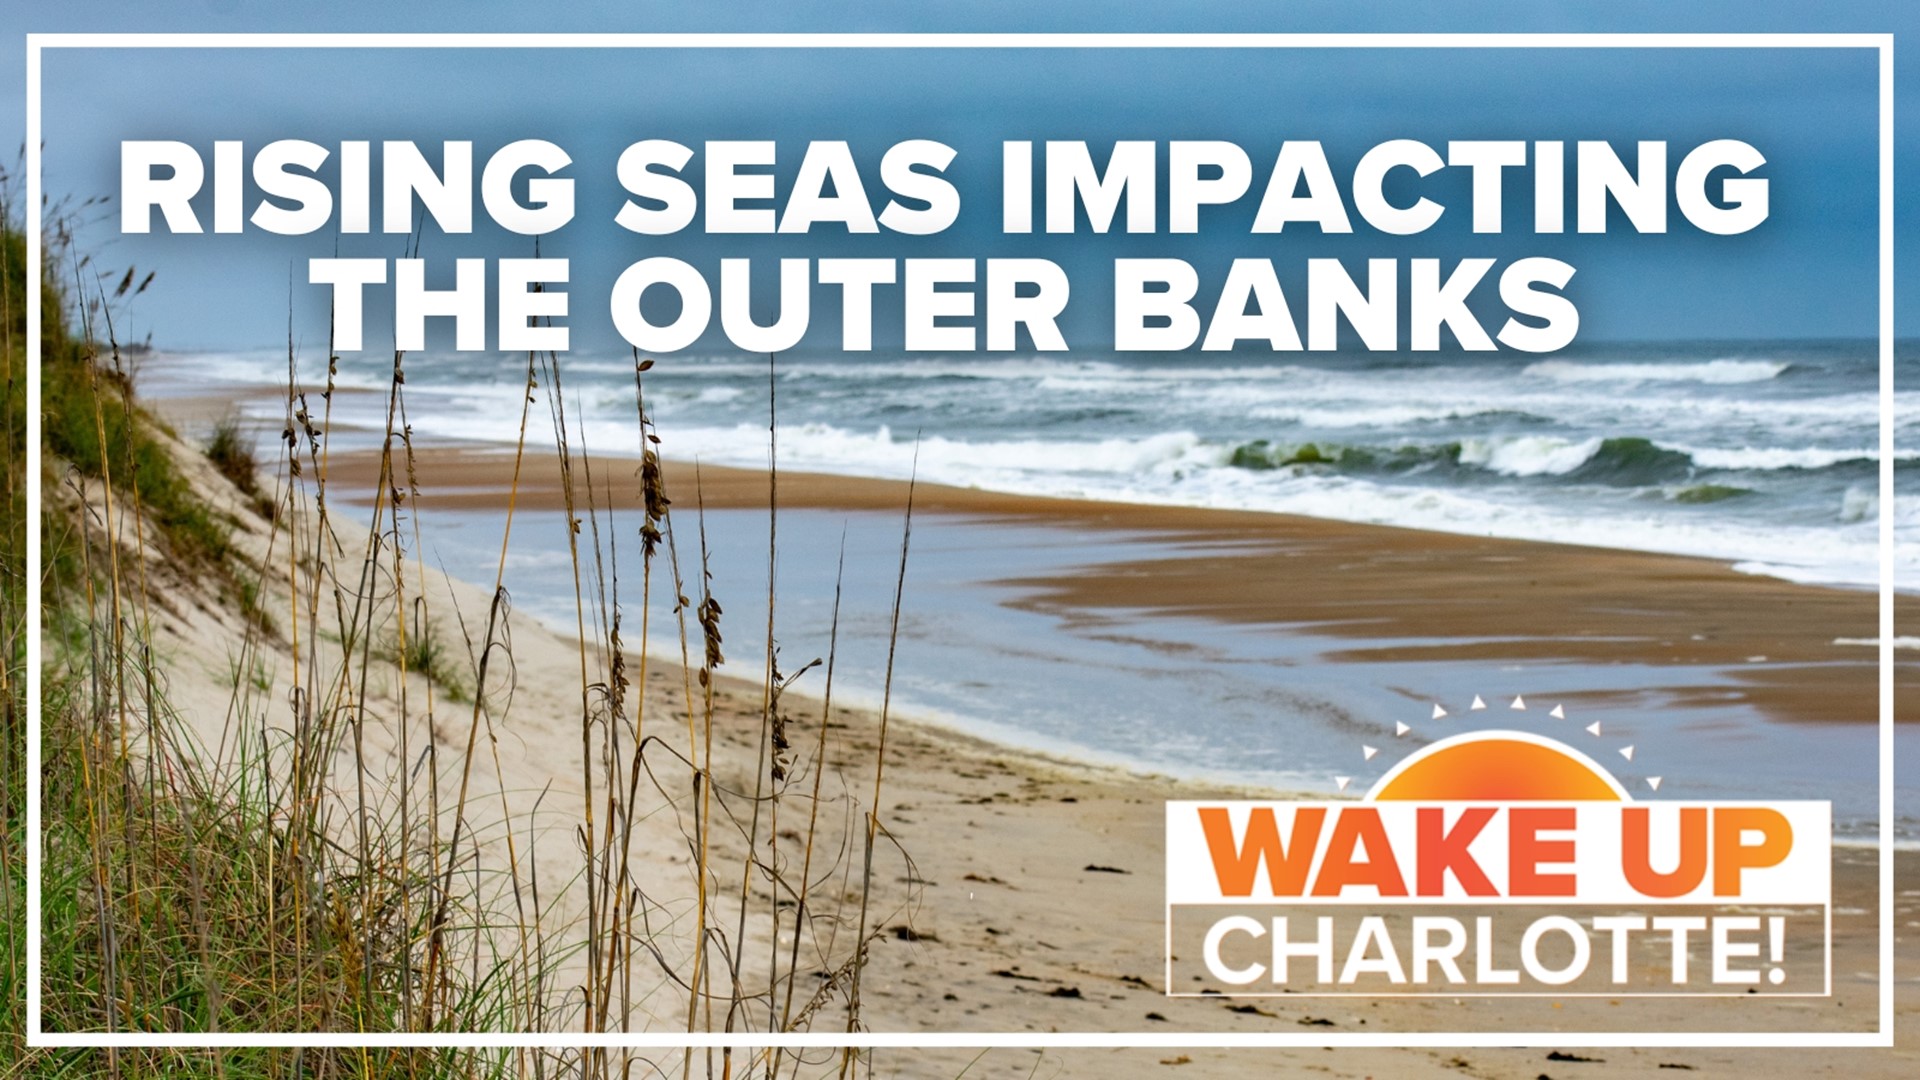 The National Park Service and Environmental experts say the threats to the Outer Banks are only going to increase as the climate continues to warm up.